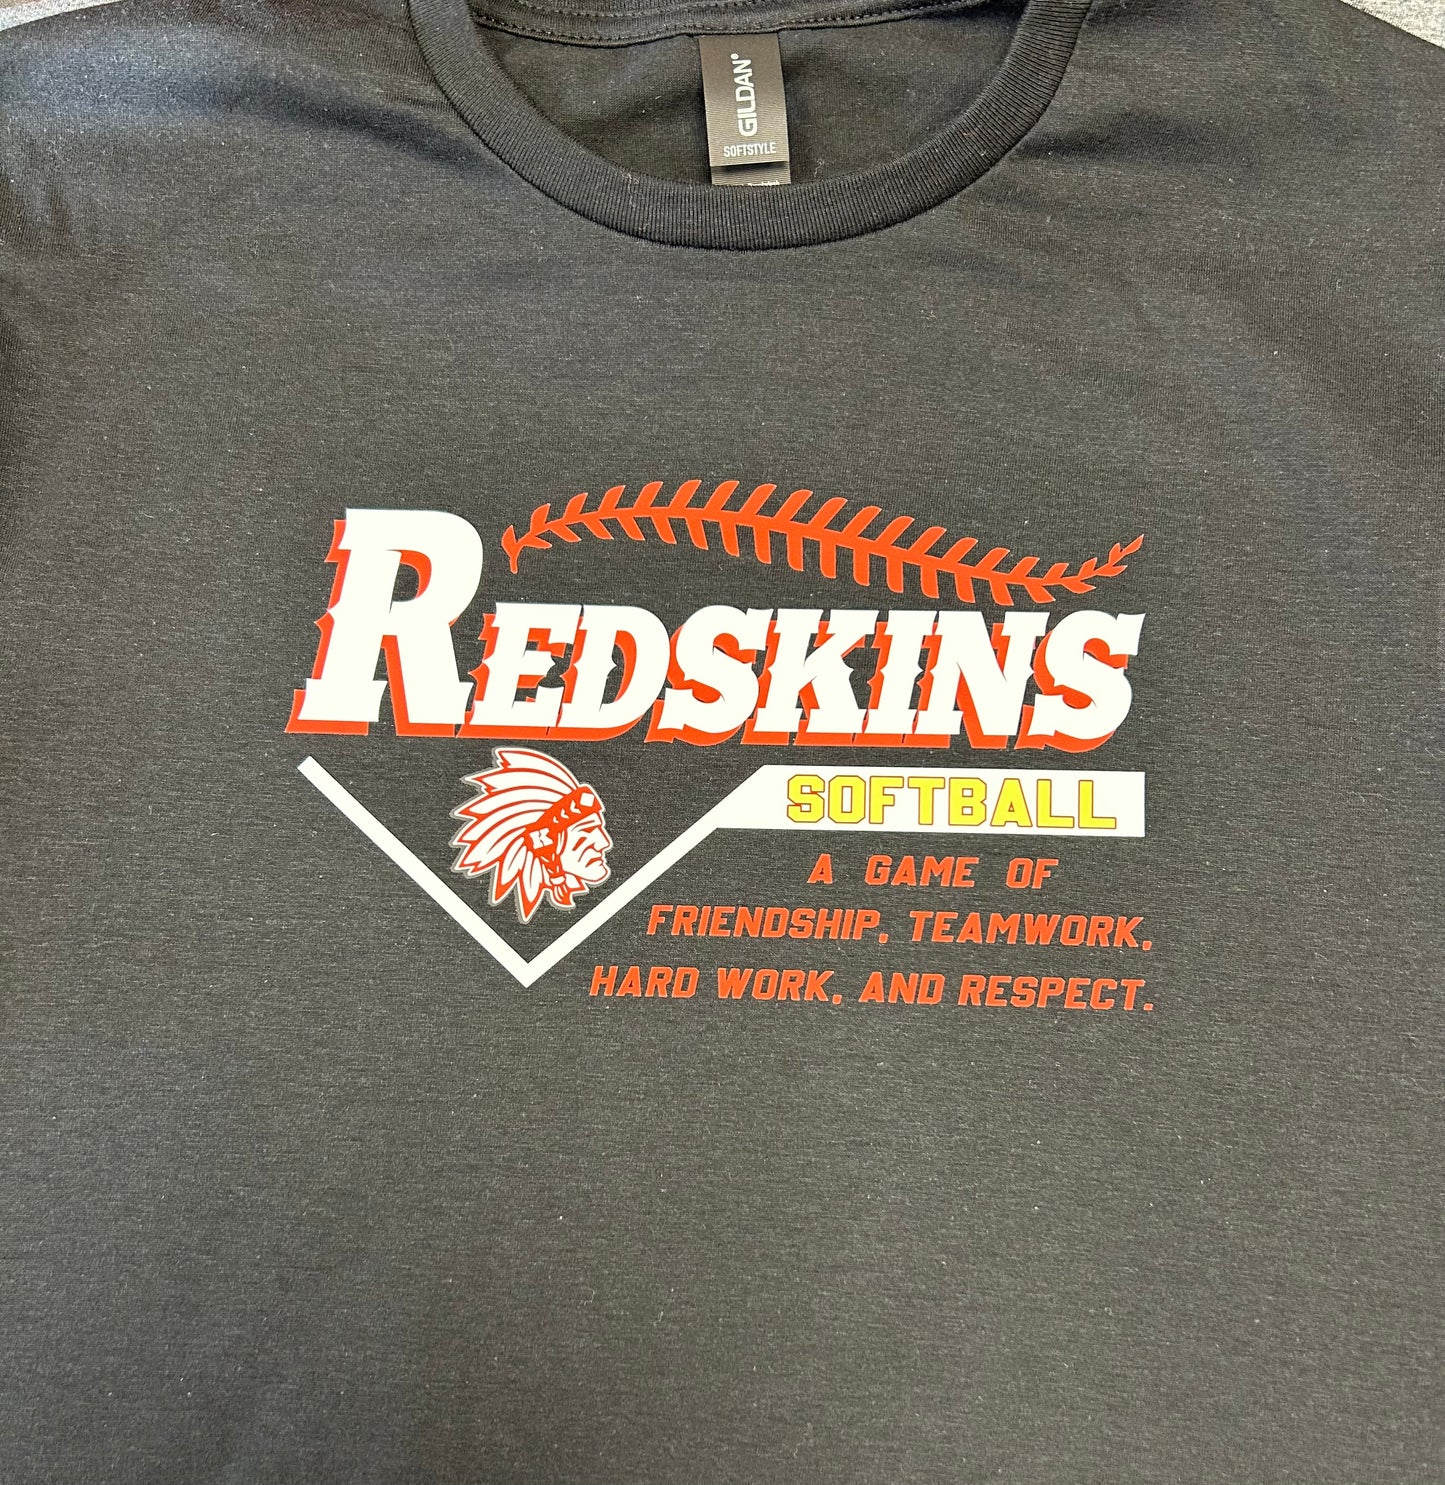 Knox Redskins Softball Team T-shirt - Black - Adult and Youth Sizes